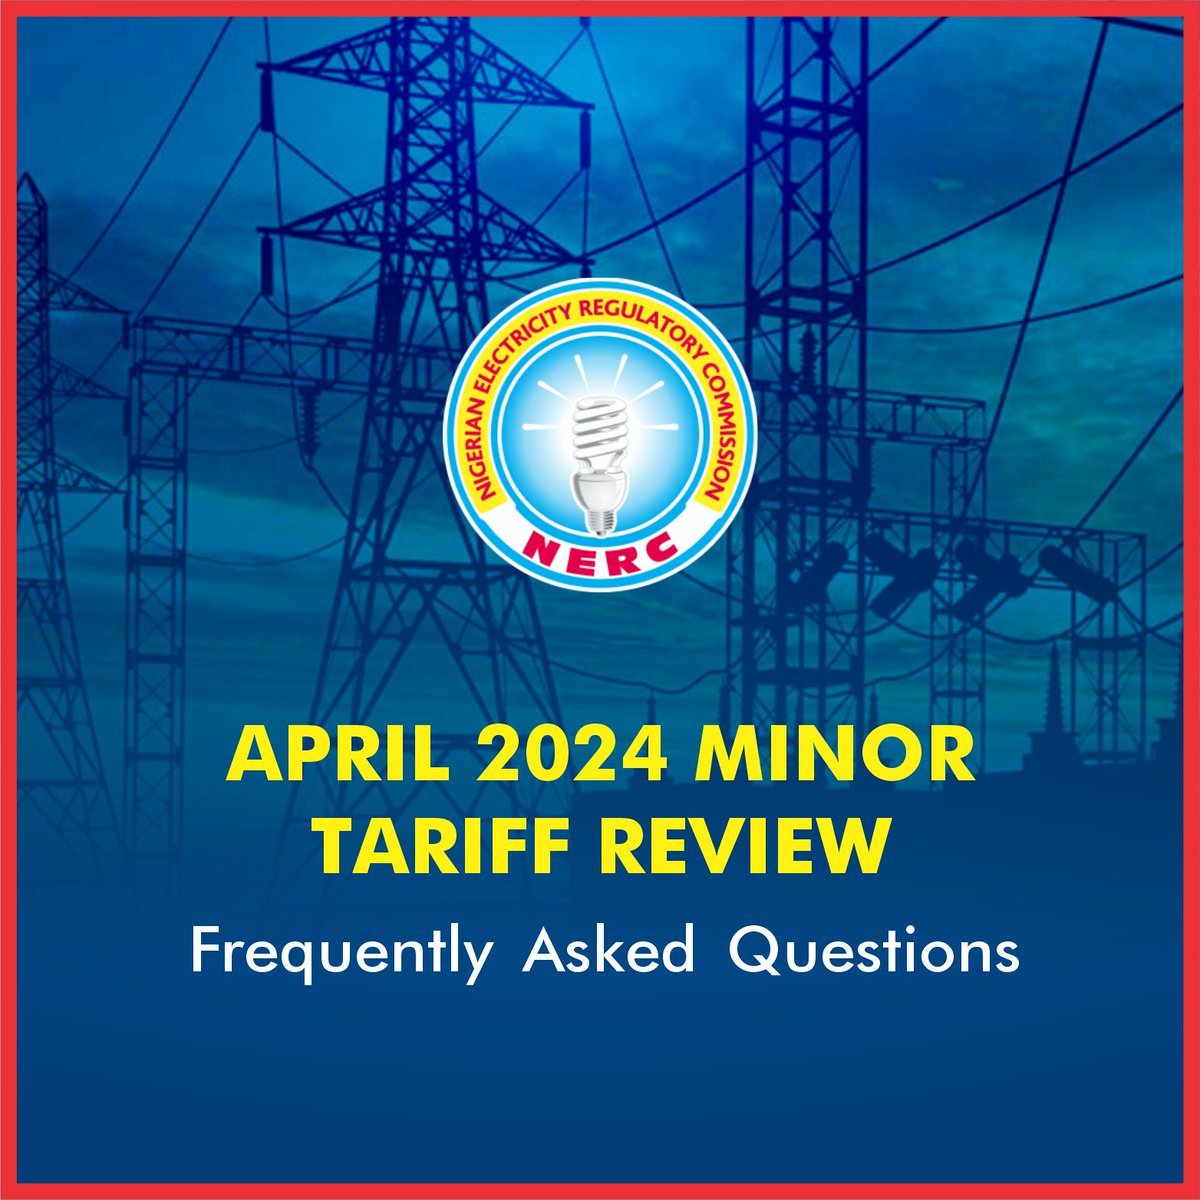 We have got responses to Frequently Asked Questions on the April 2024 Minor Tariff Review. Kindly read through this. #NERC #Electricity #Compliance #SuplementaryOrder #CustomerService #Response